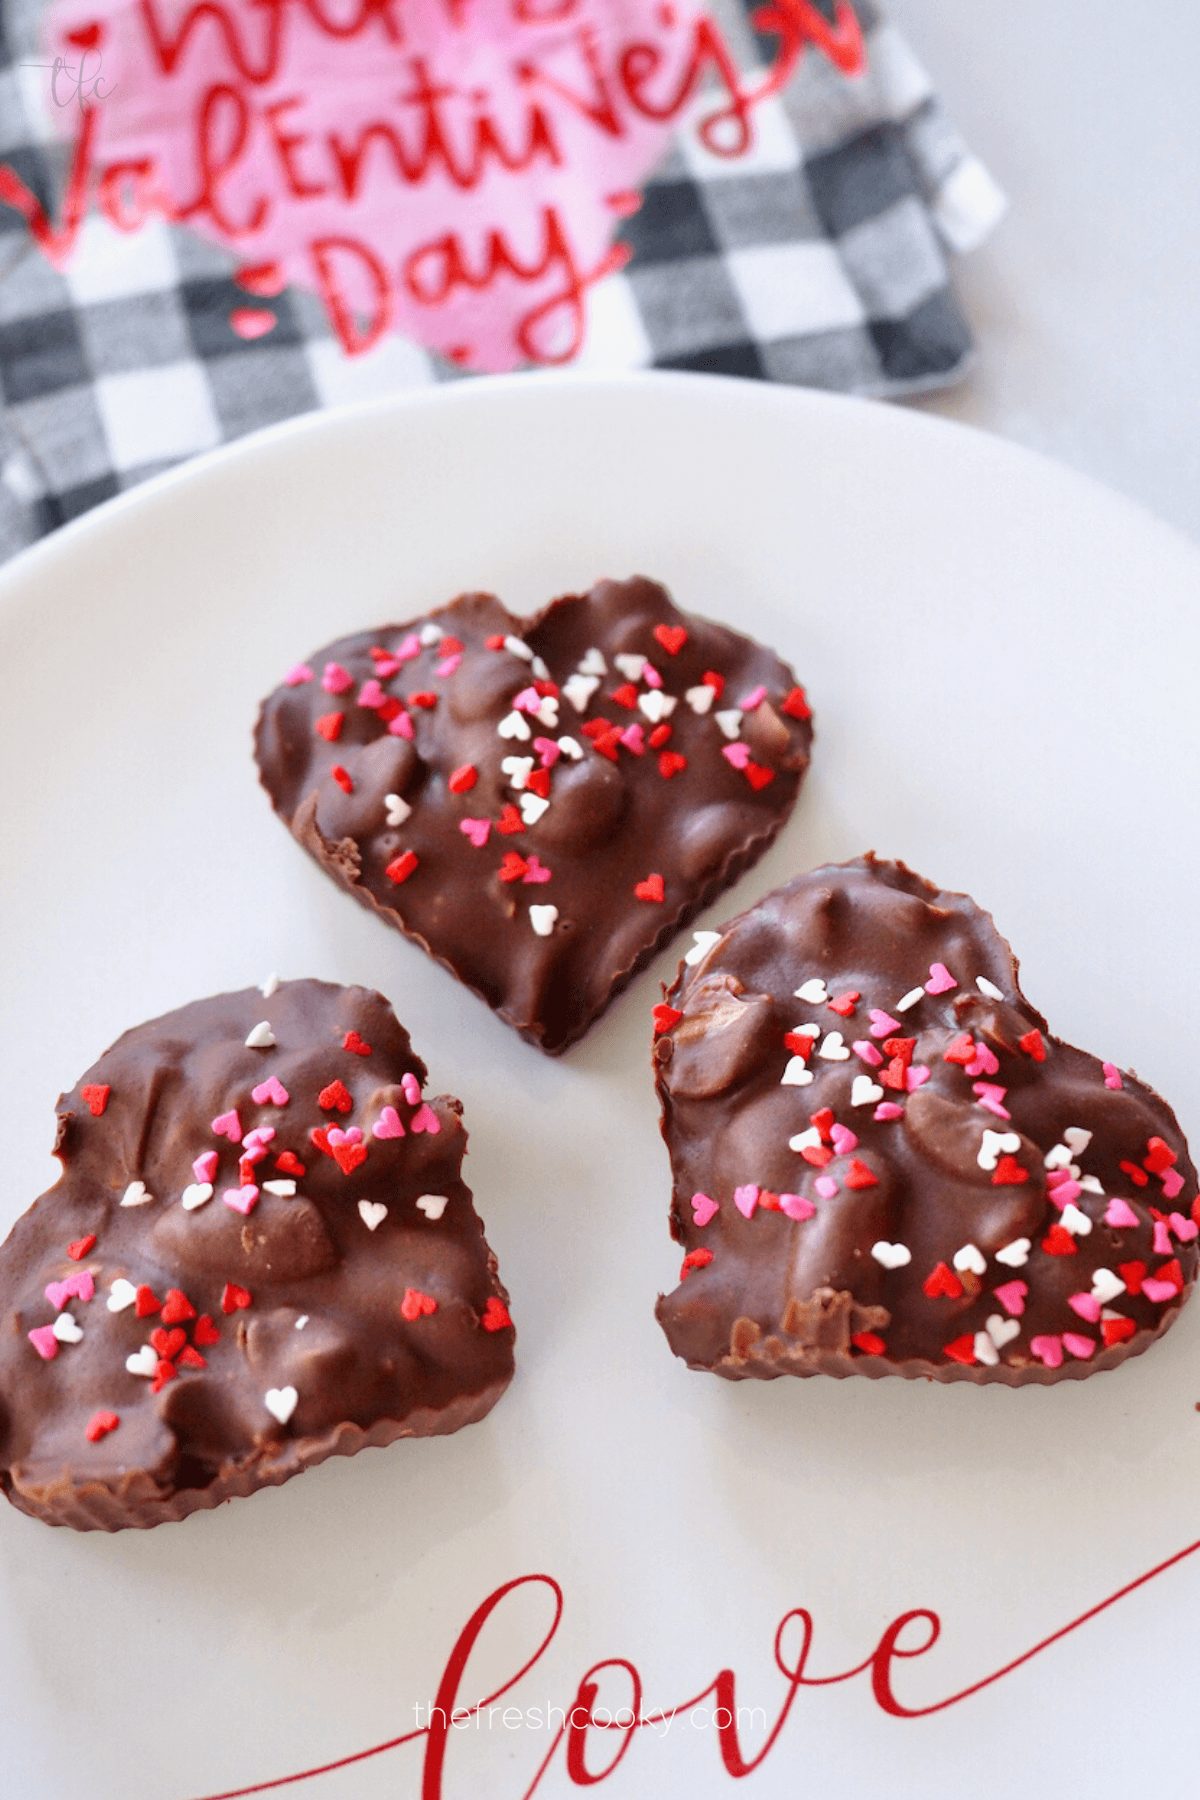 Pretty heart shaped crockpot peanut clusters on love plate for Valentine's day.